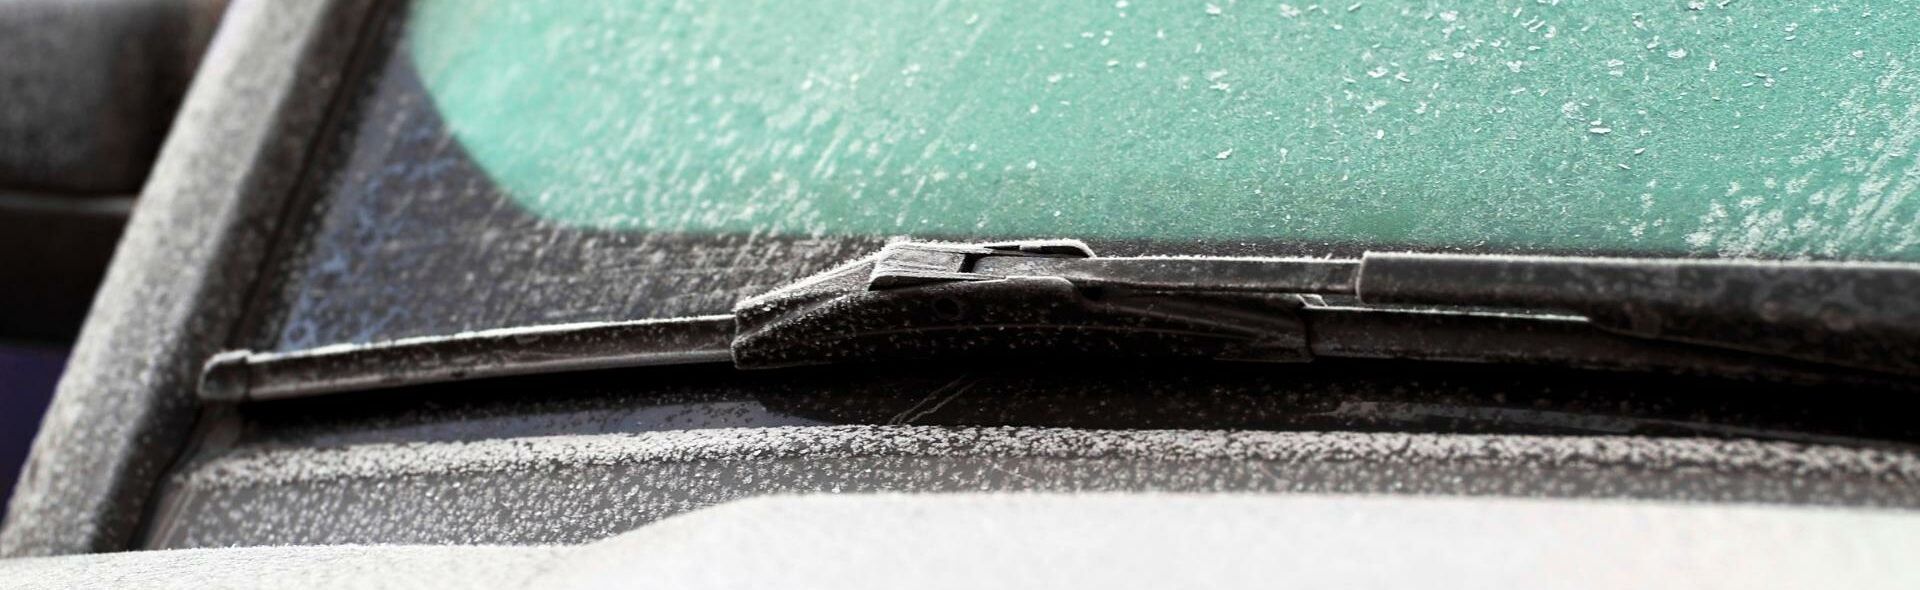 Can 'superhydrophobic' material end de-icing, scraping car windshields in  winter? 